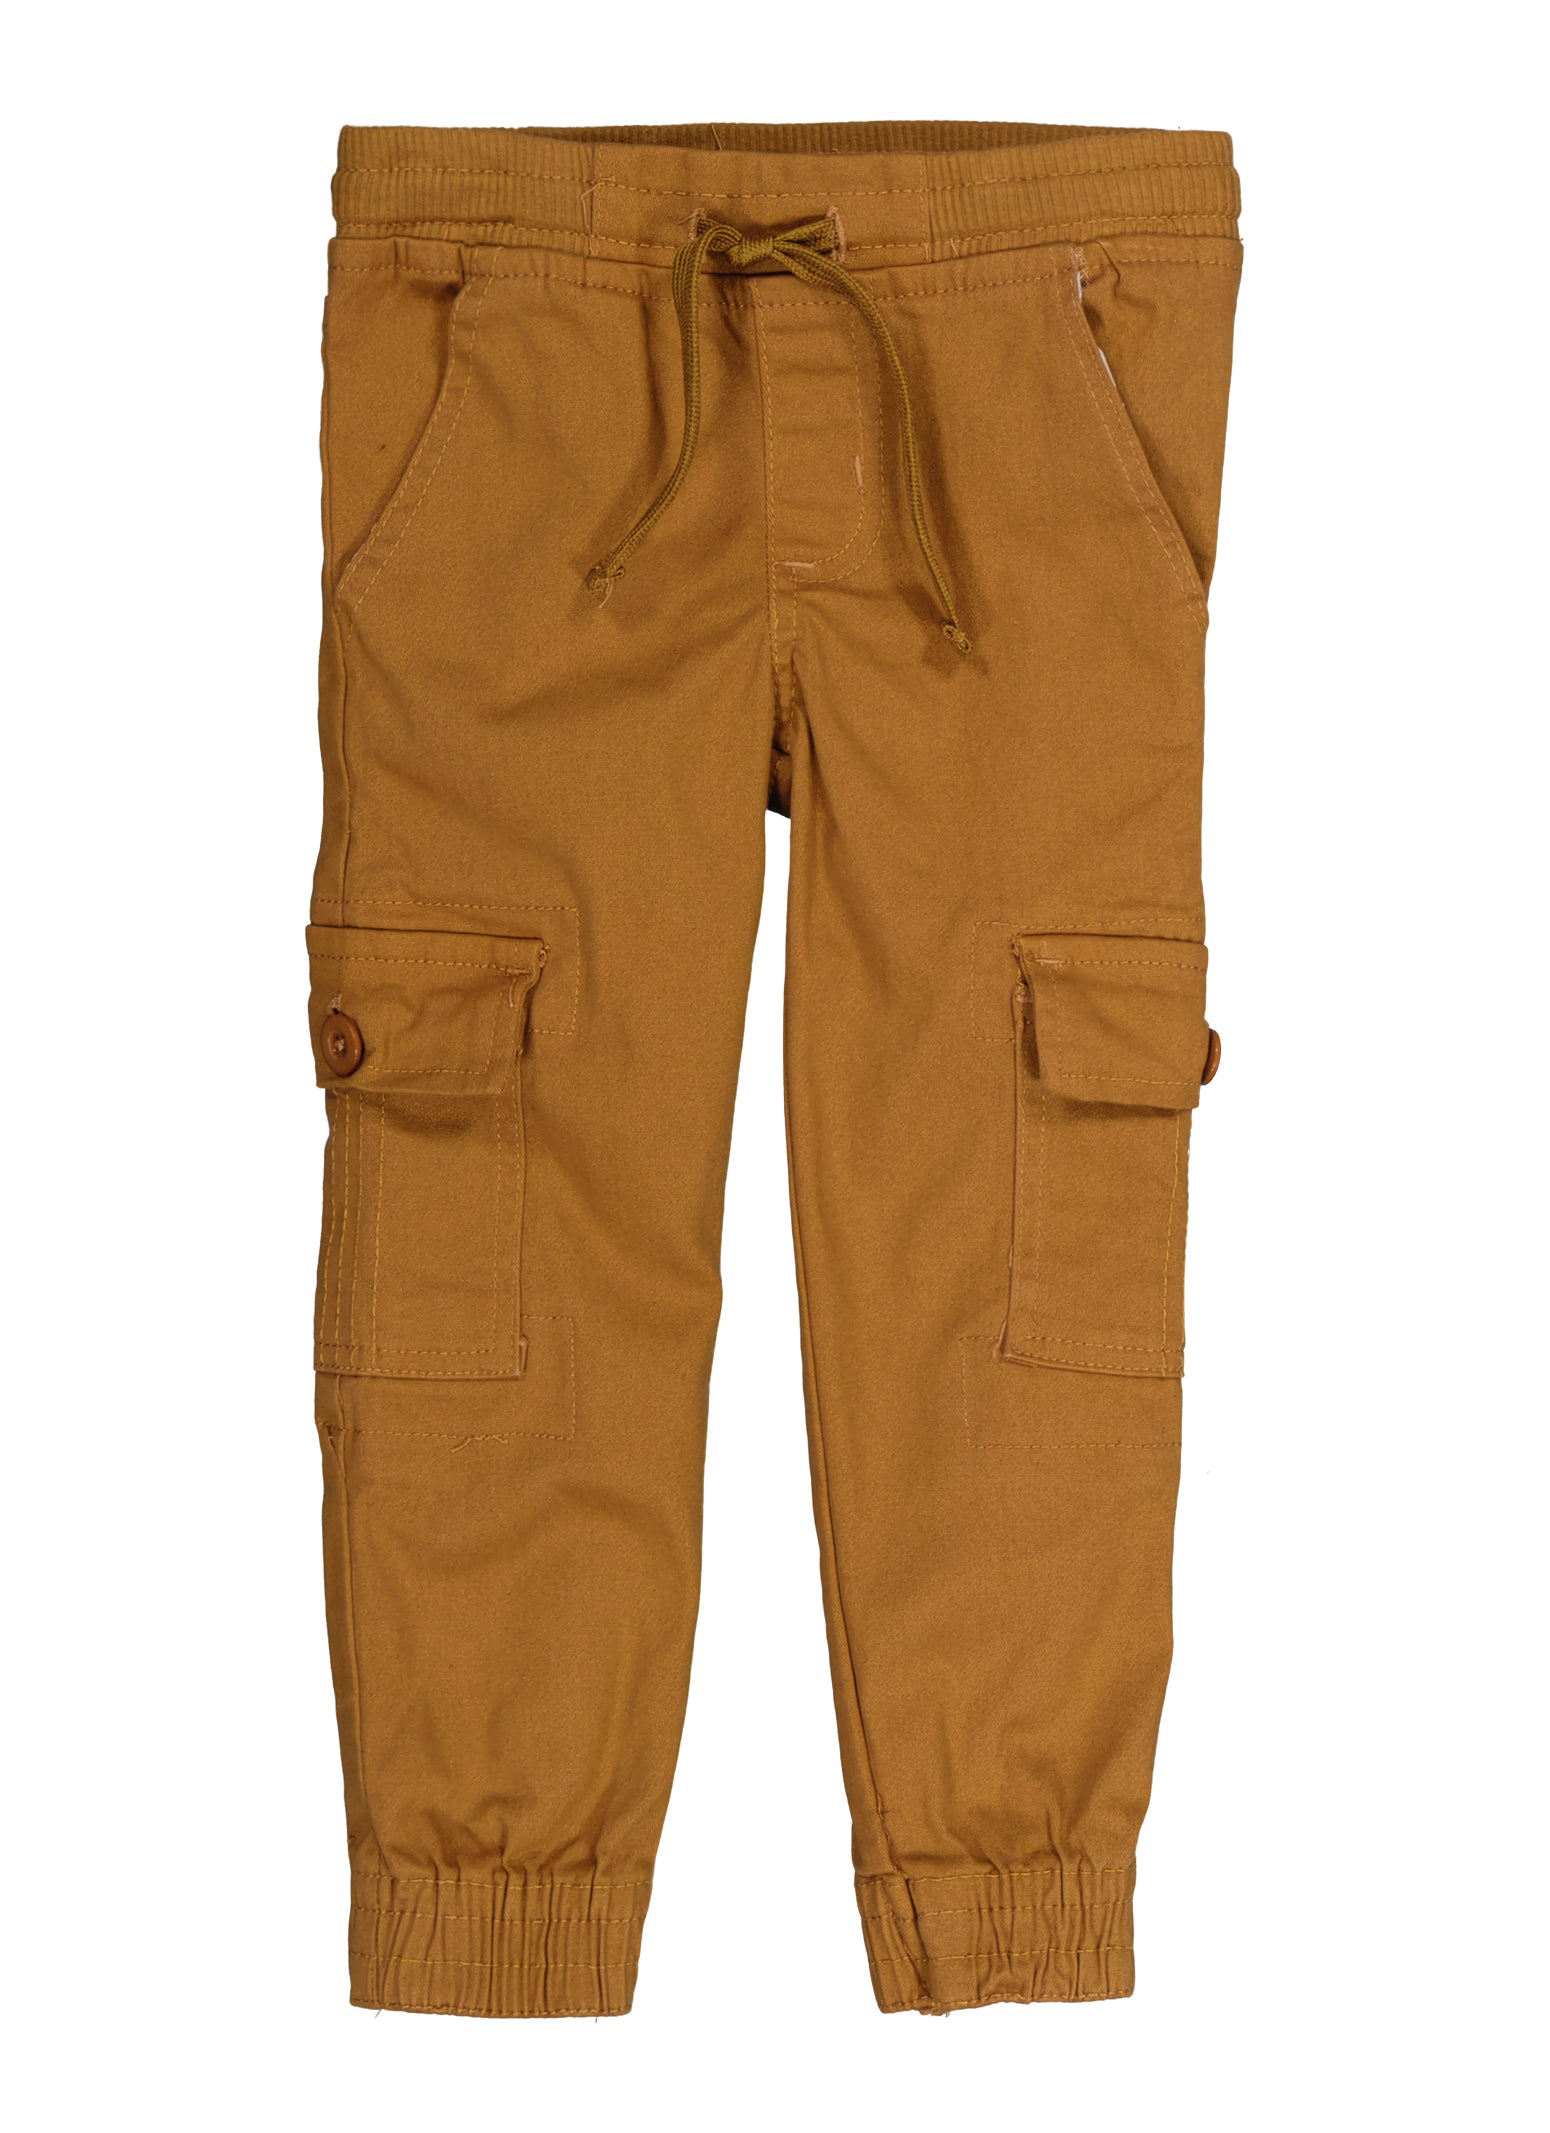 Buy Boys Trousers Solid -Brown Online at Best Price | H by Hamleys